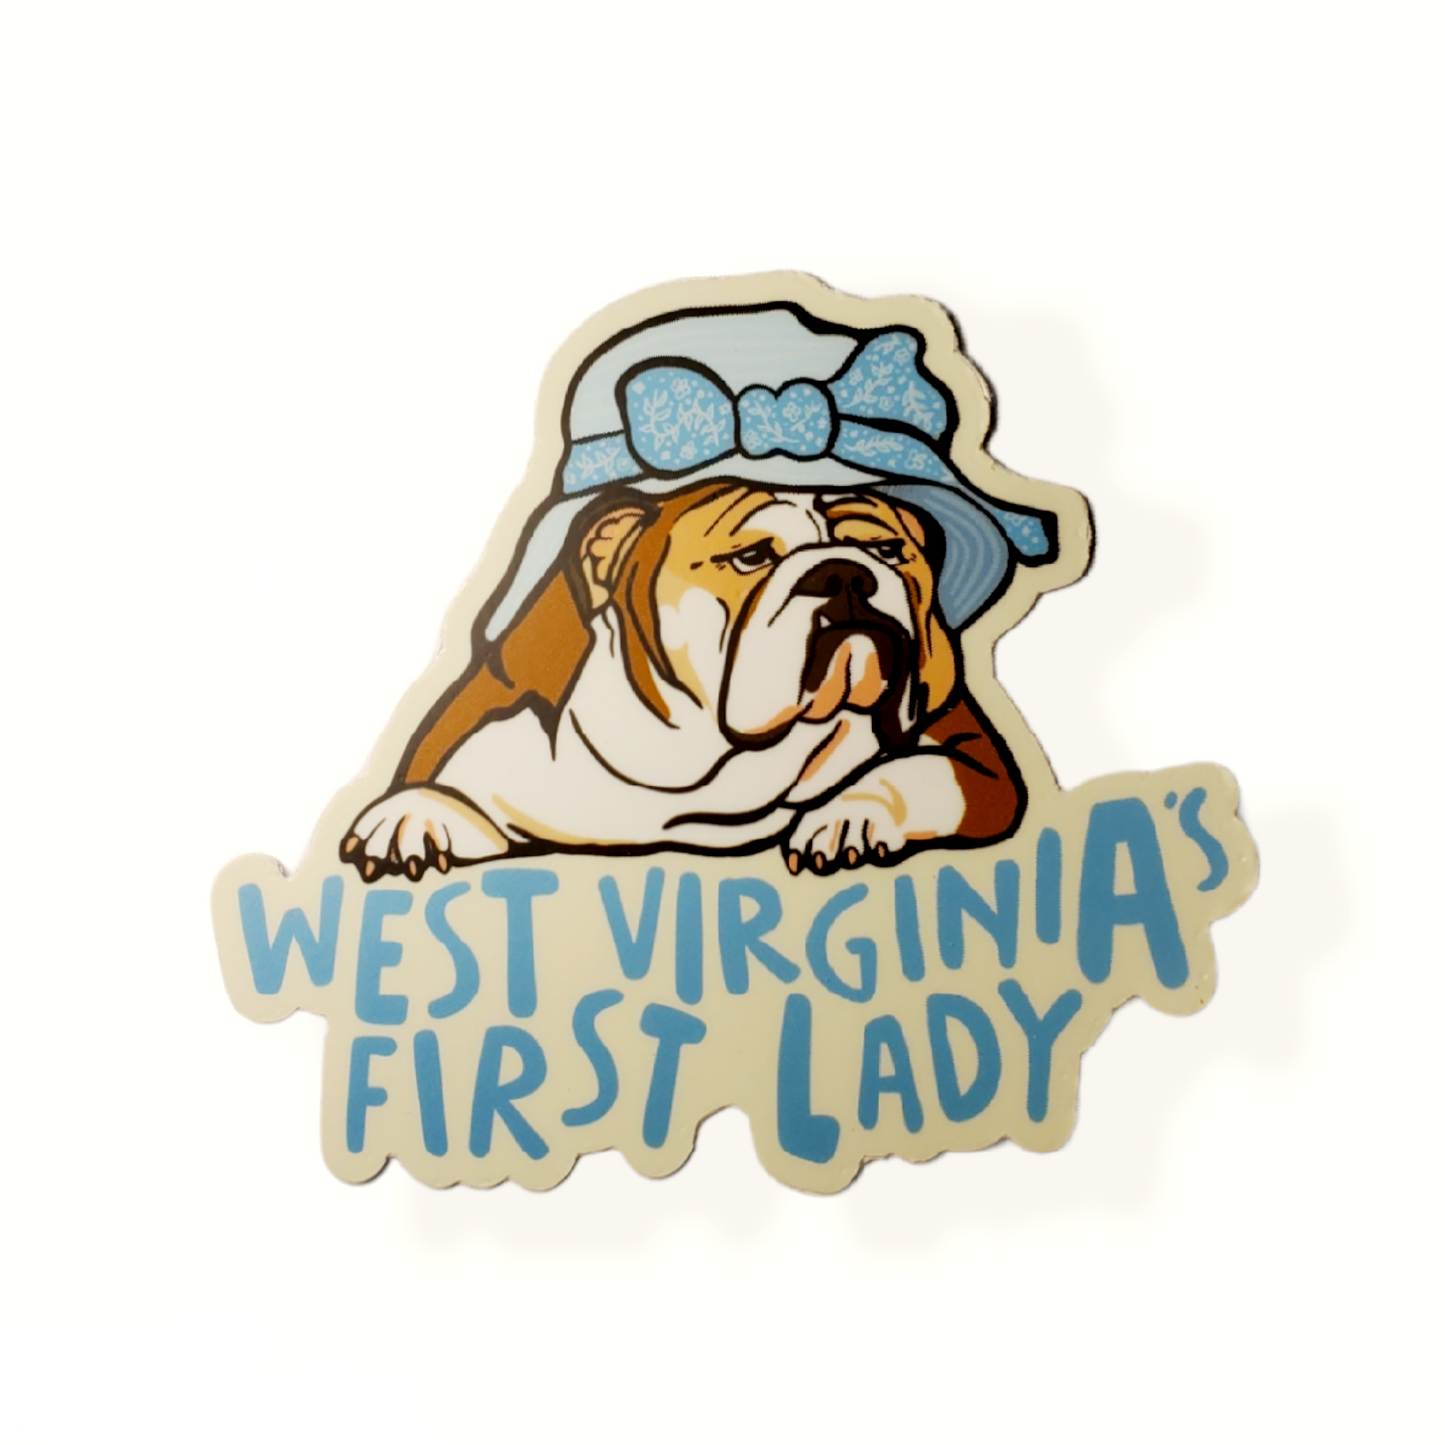 West Virginia's First Lady Baby Dog Decal